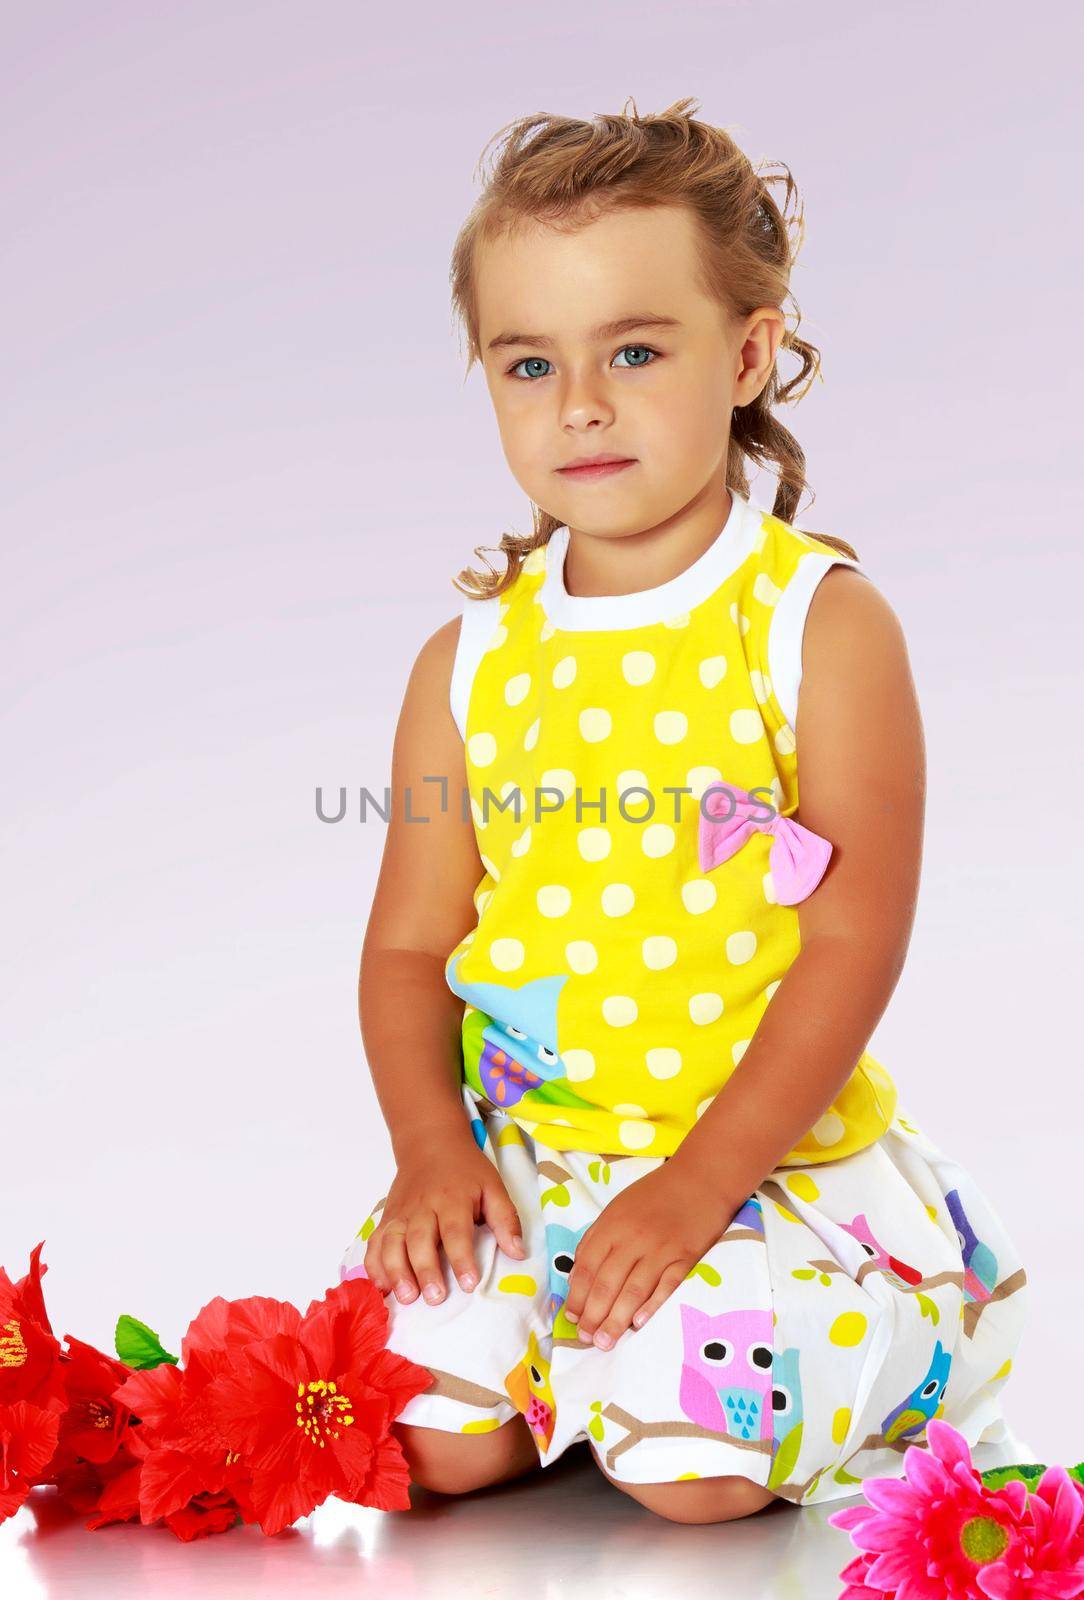 Beautiful little girl in a yellow summer dress kneeling on the floor. Beside her lay a red artificial flowers.Not a purple gradient background.